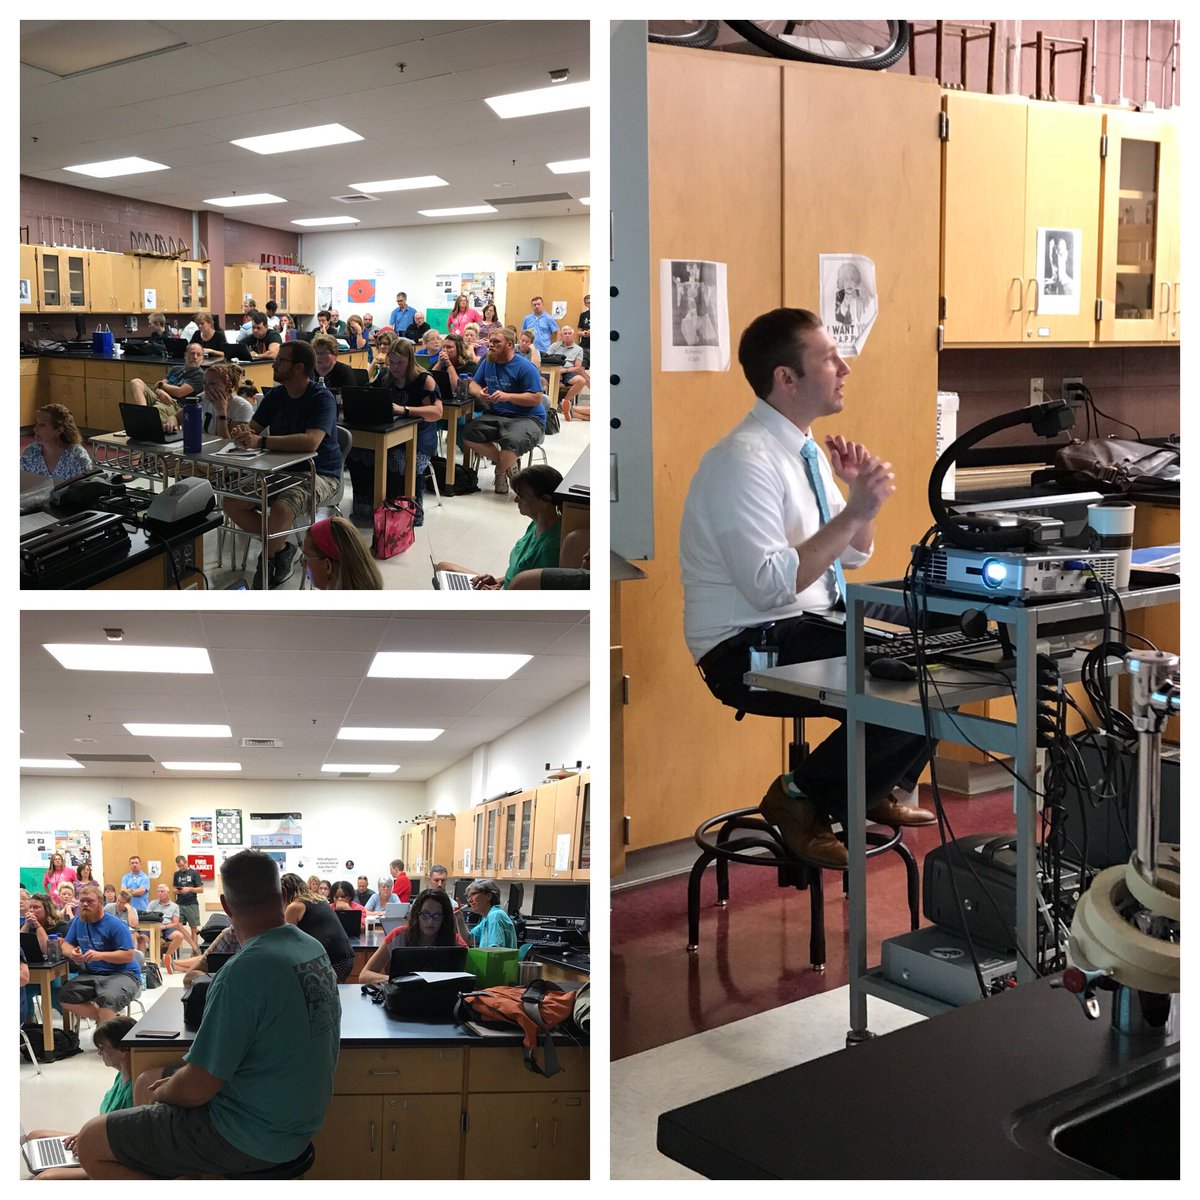 Standing room only at the optional Schoology session at the Secondary Science In-service with @FCPSsciencetech! #empowerteachers